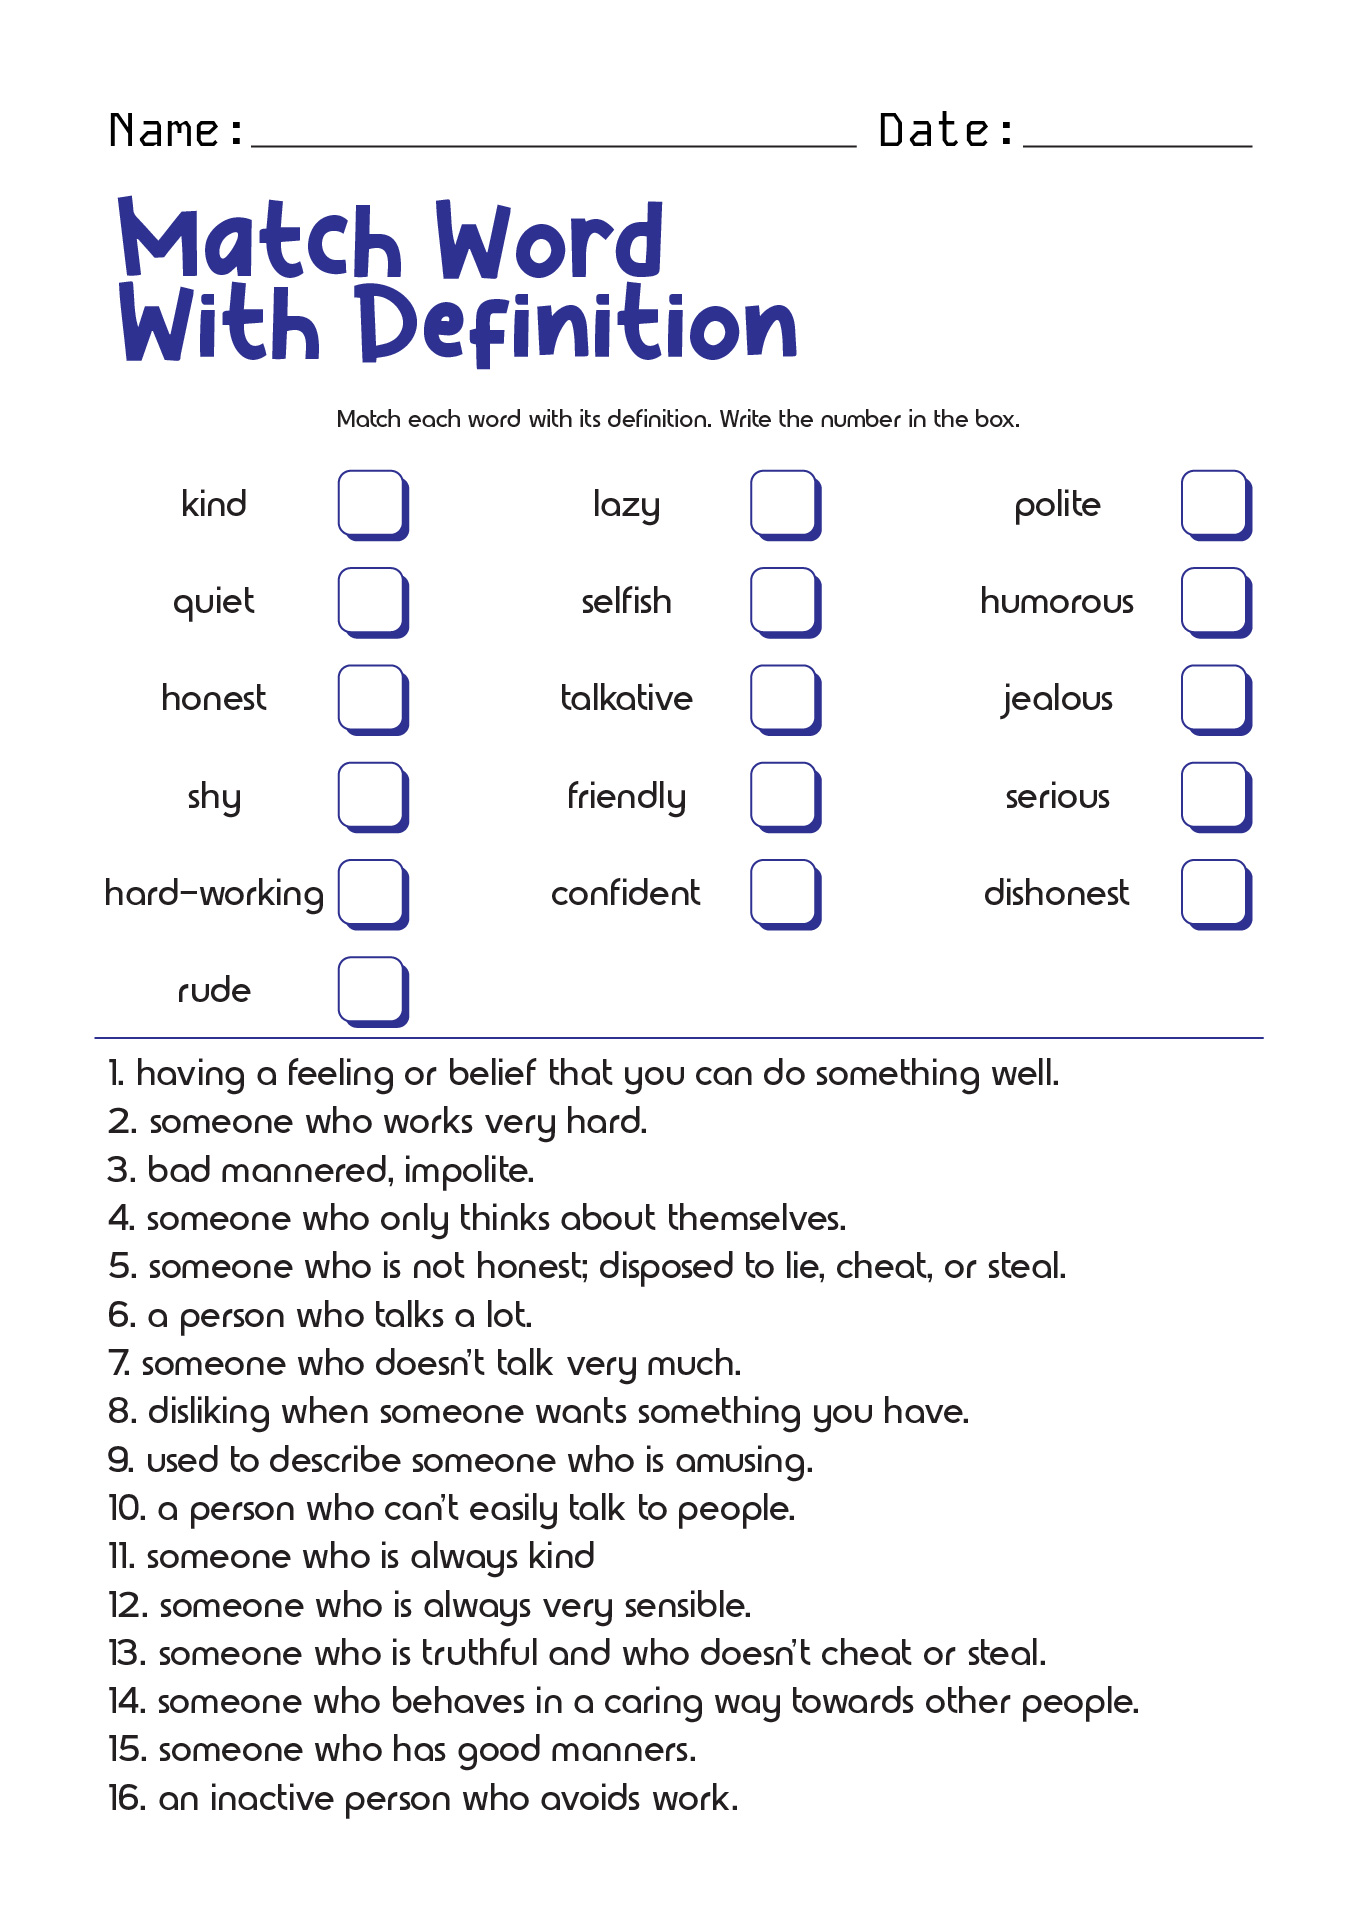 Match Word with Definition